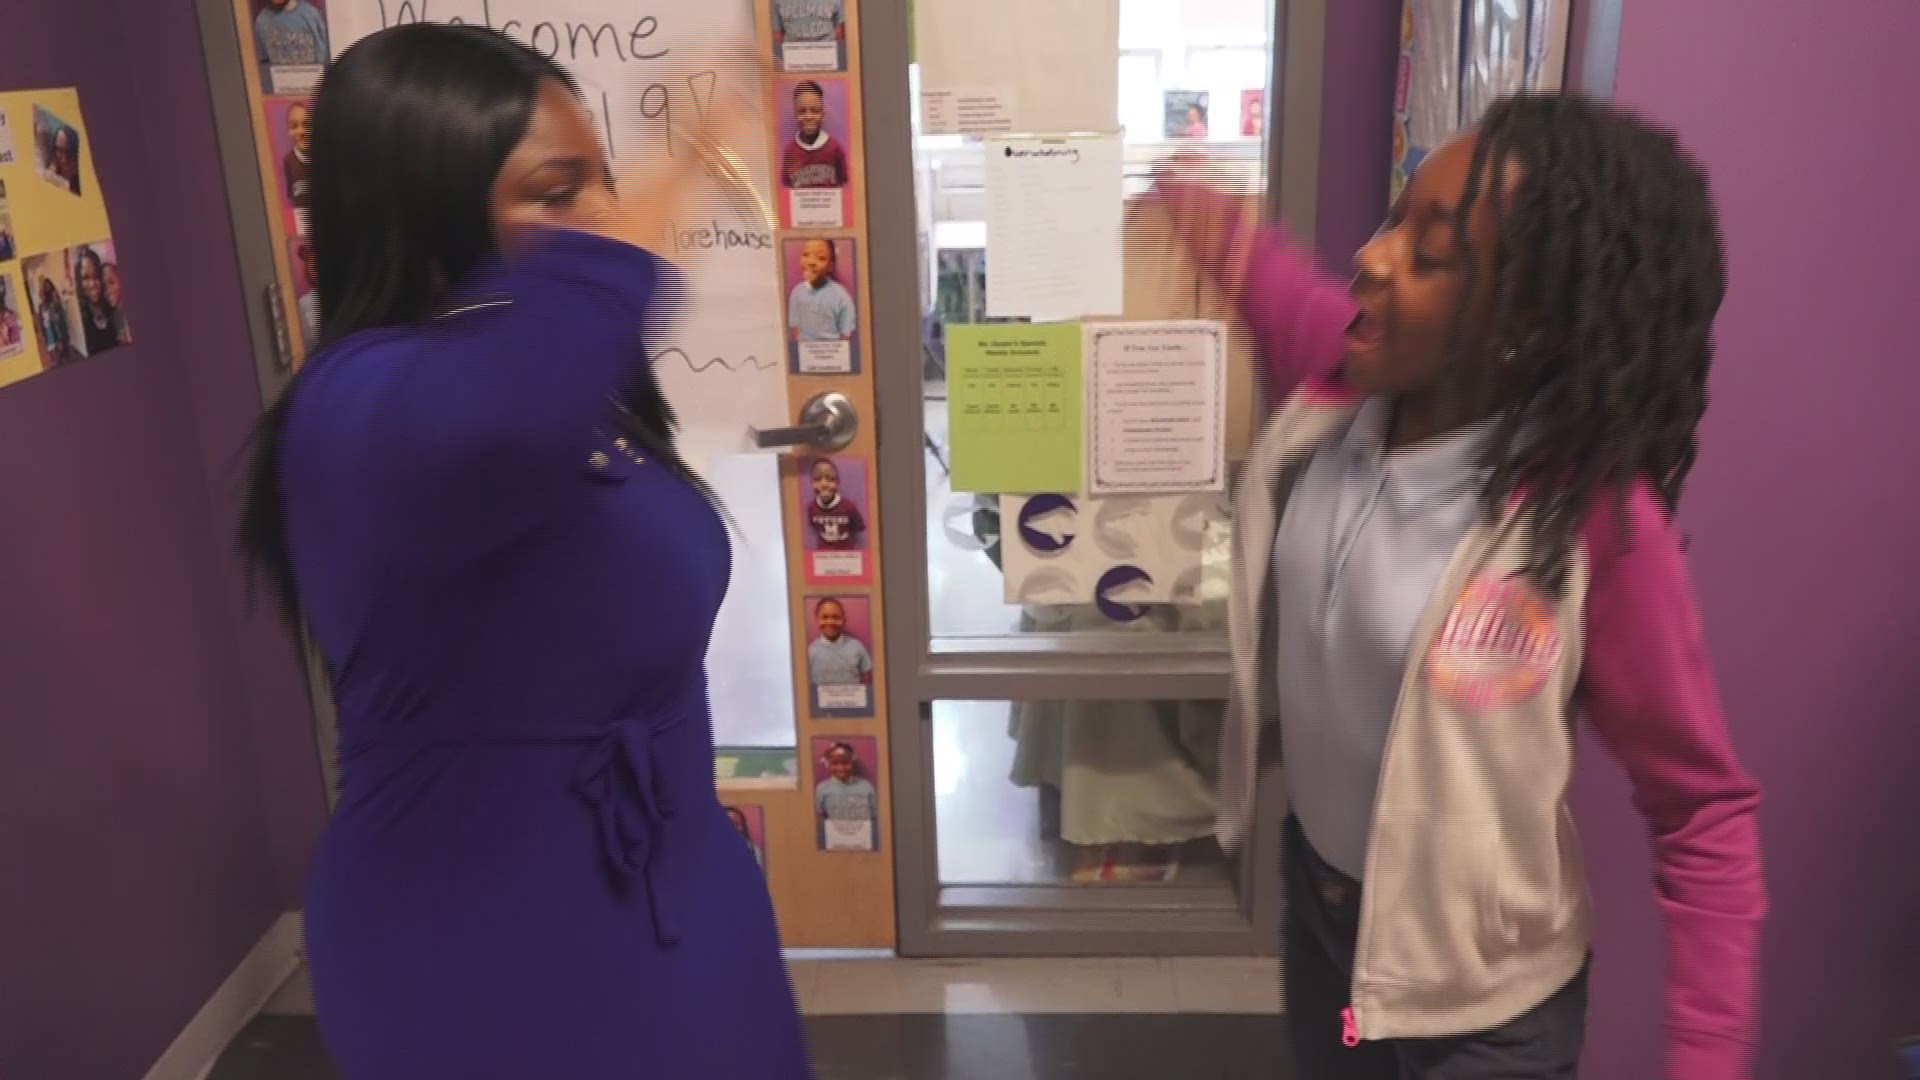 DC’s 2019 Teacher of the Year, Kelly Harper, said the key to fighting injustices, such as the school-to-prison pipeline, begins in the classroom.